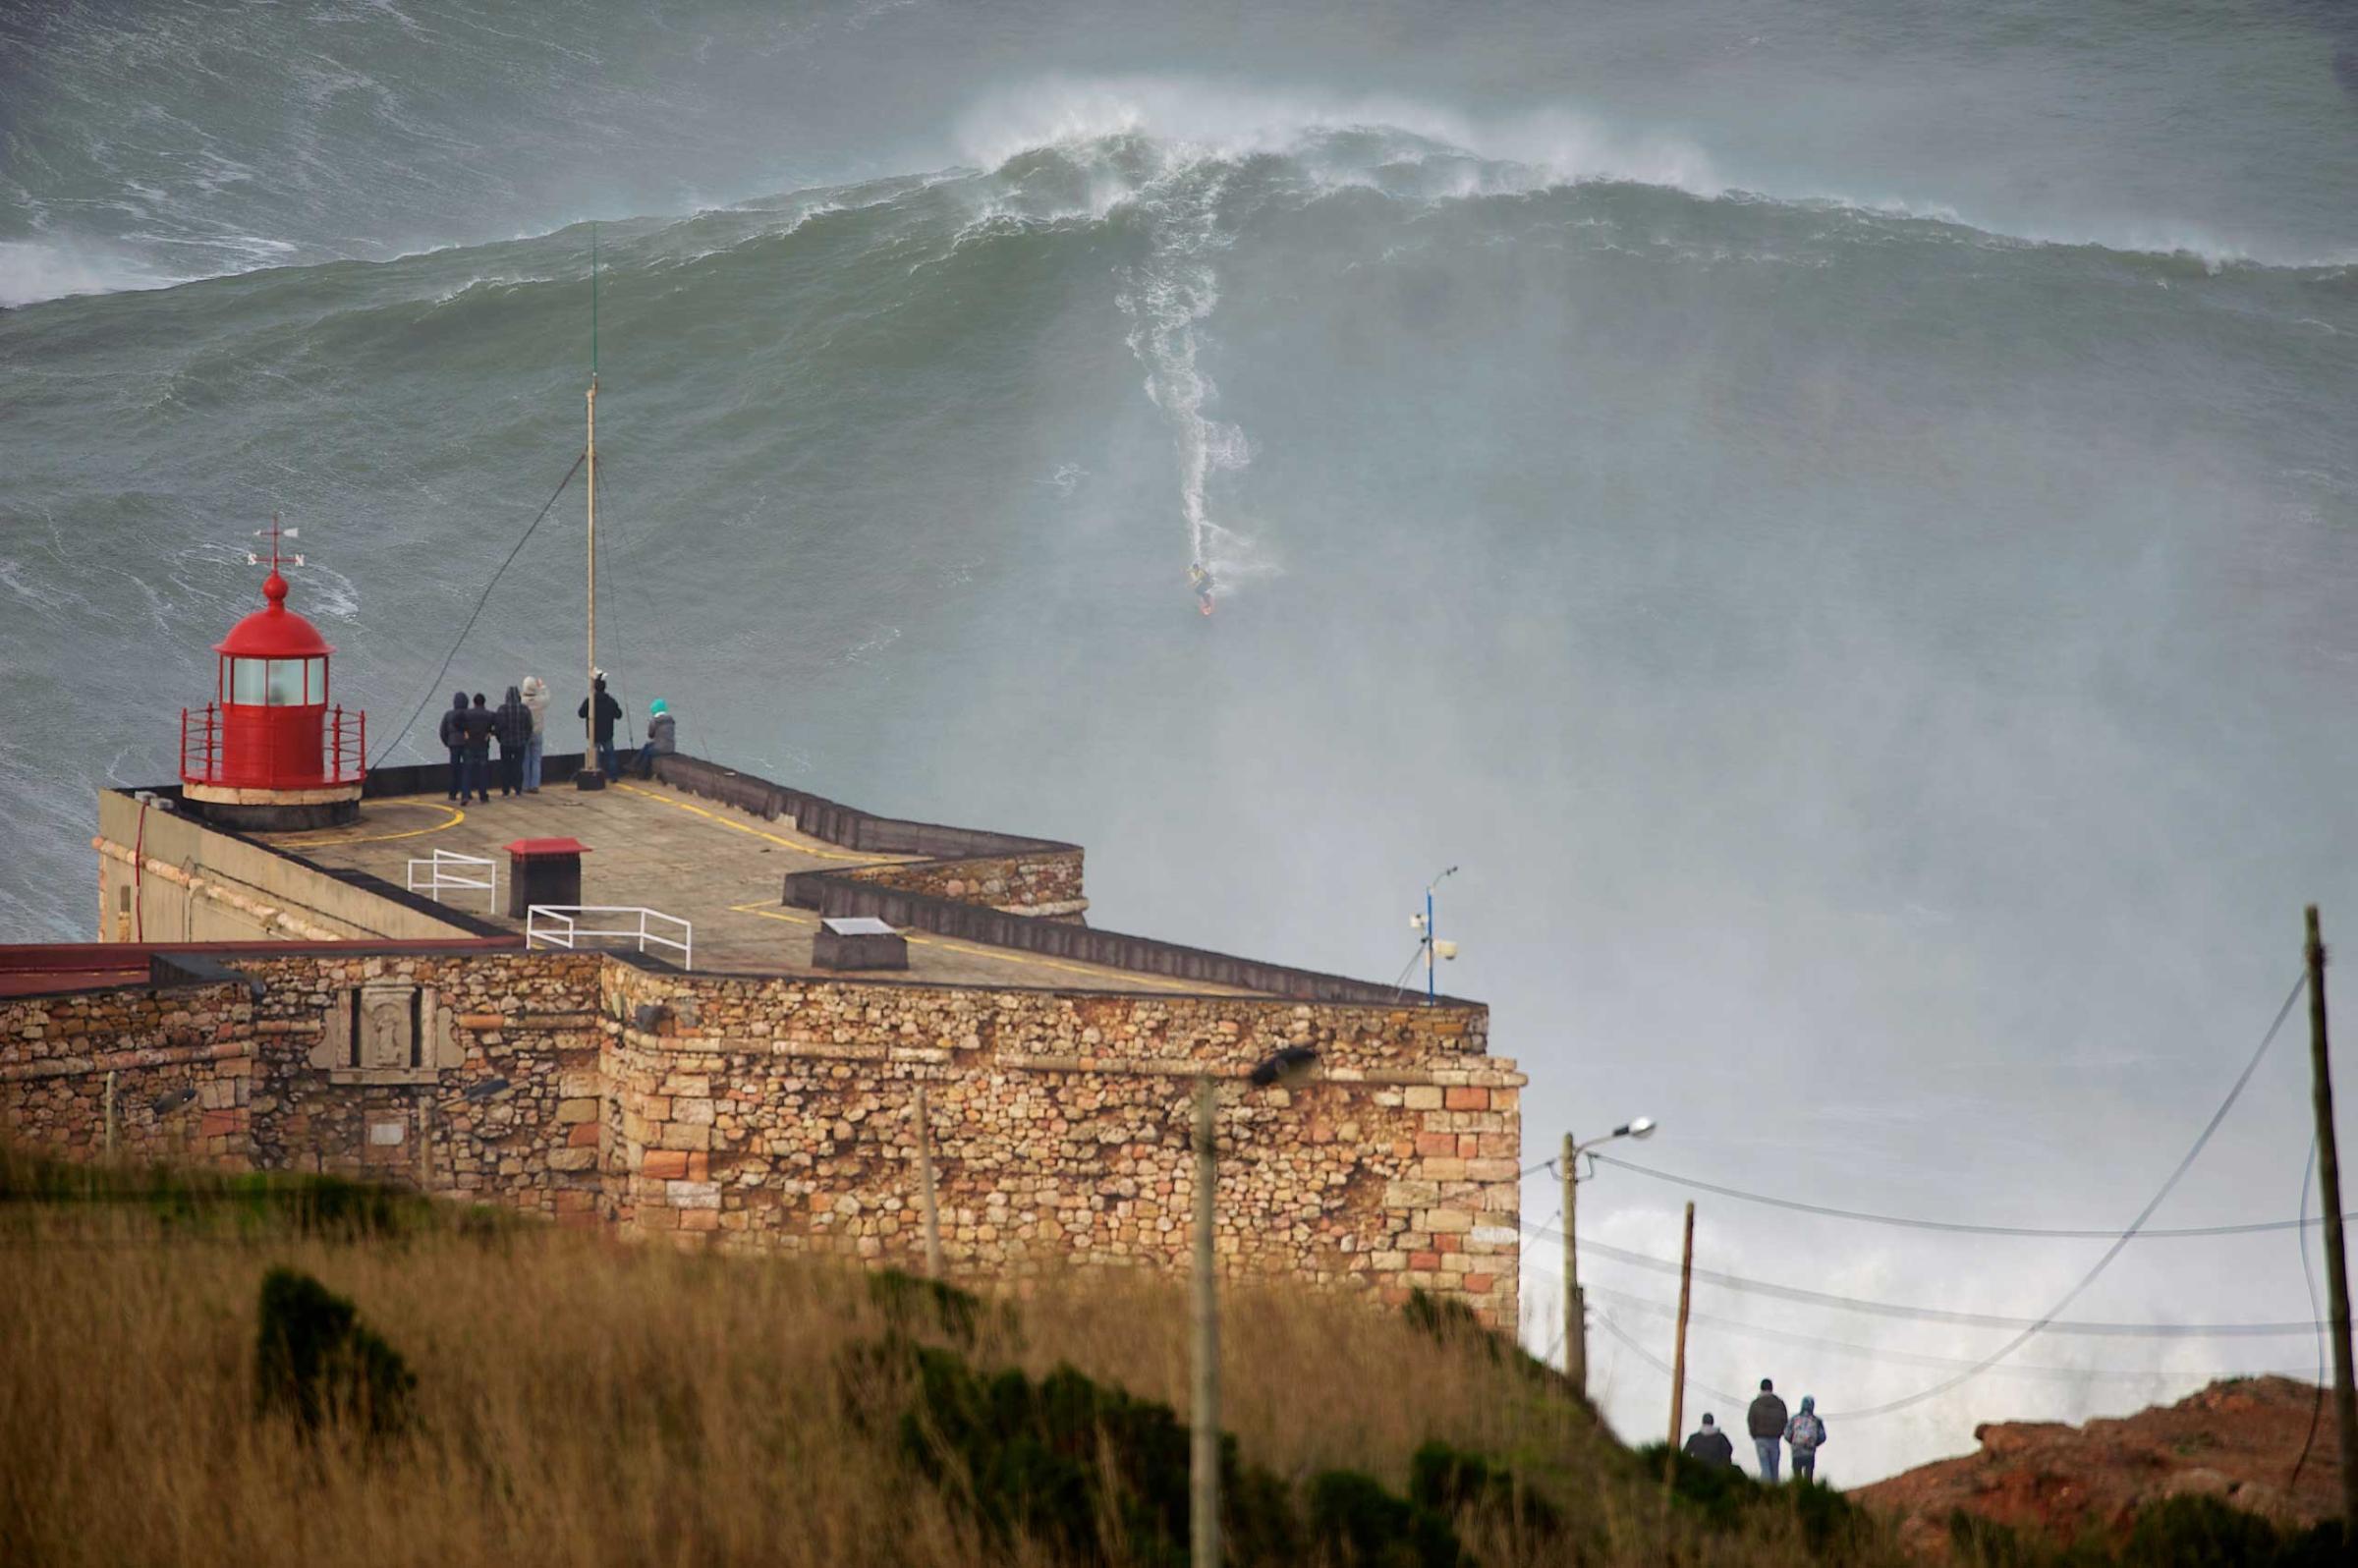 SURFING THE WORLD'S BIGGEST WAVE